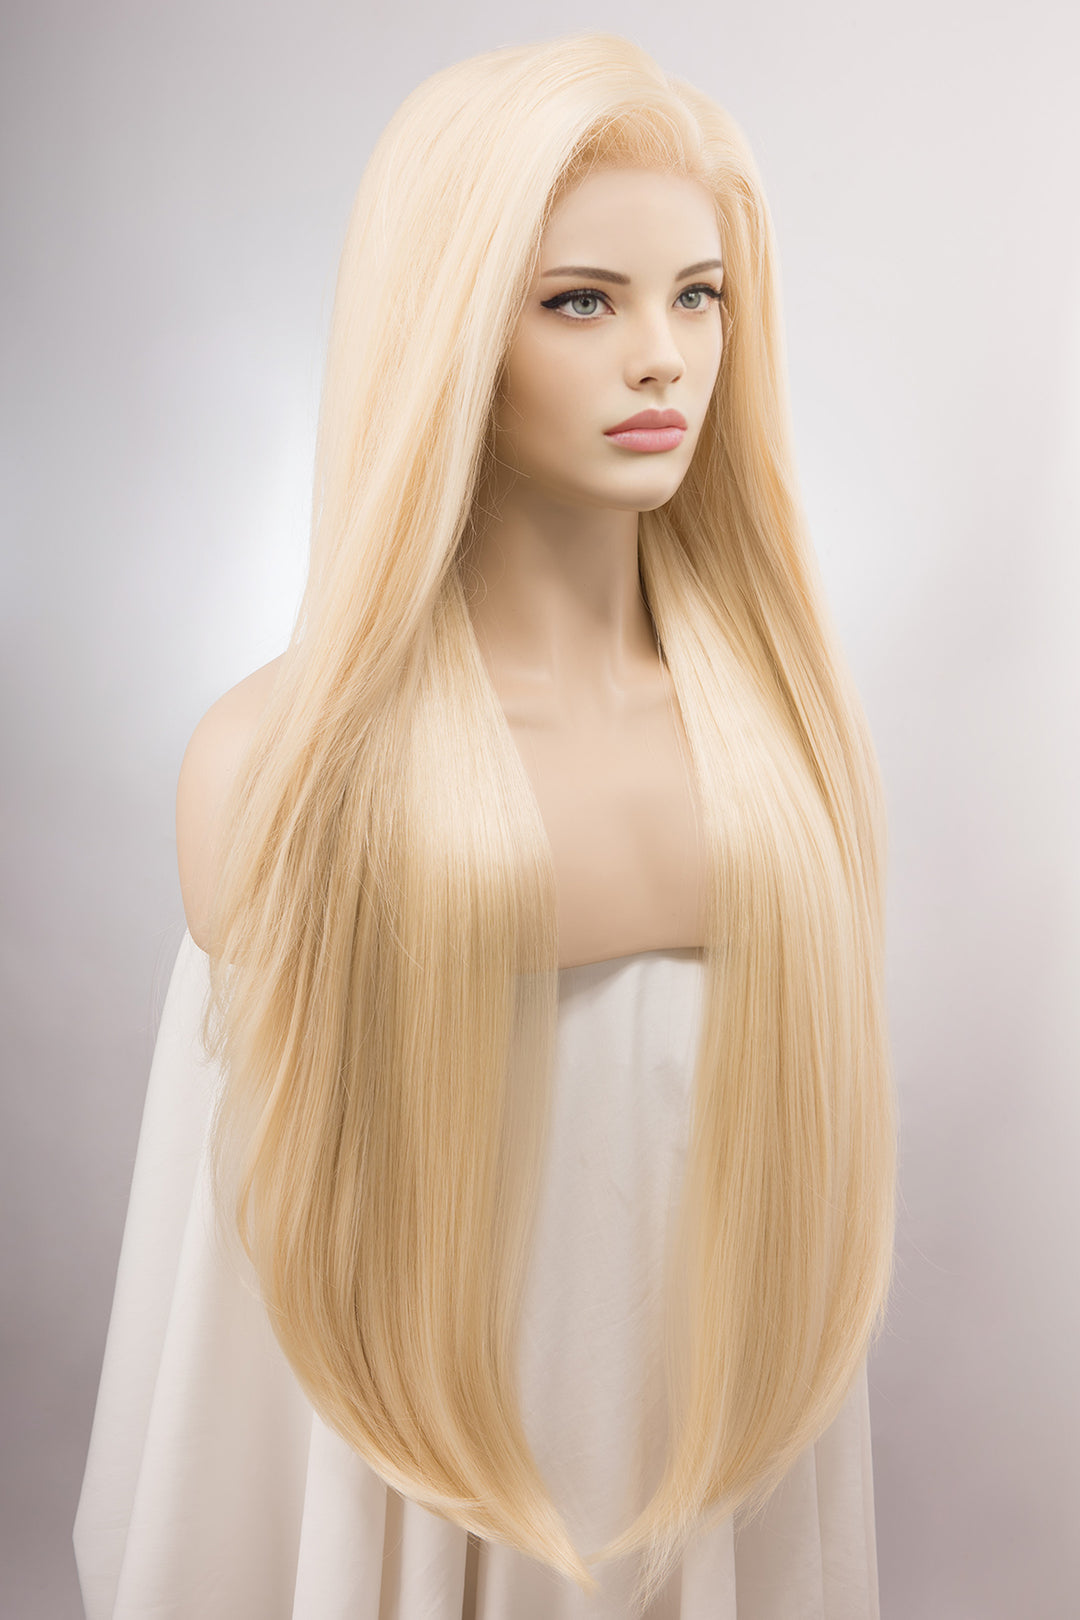 Platinum Blonde Wig Barbie Wig Lace Front Wig Large Lace 13" x 3" Hand Tied Area Drag Queen Wig Blonde Drag Wig Cosplay Wig INES